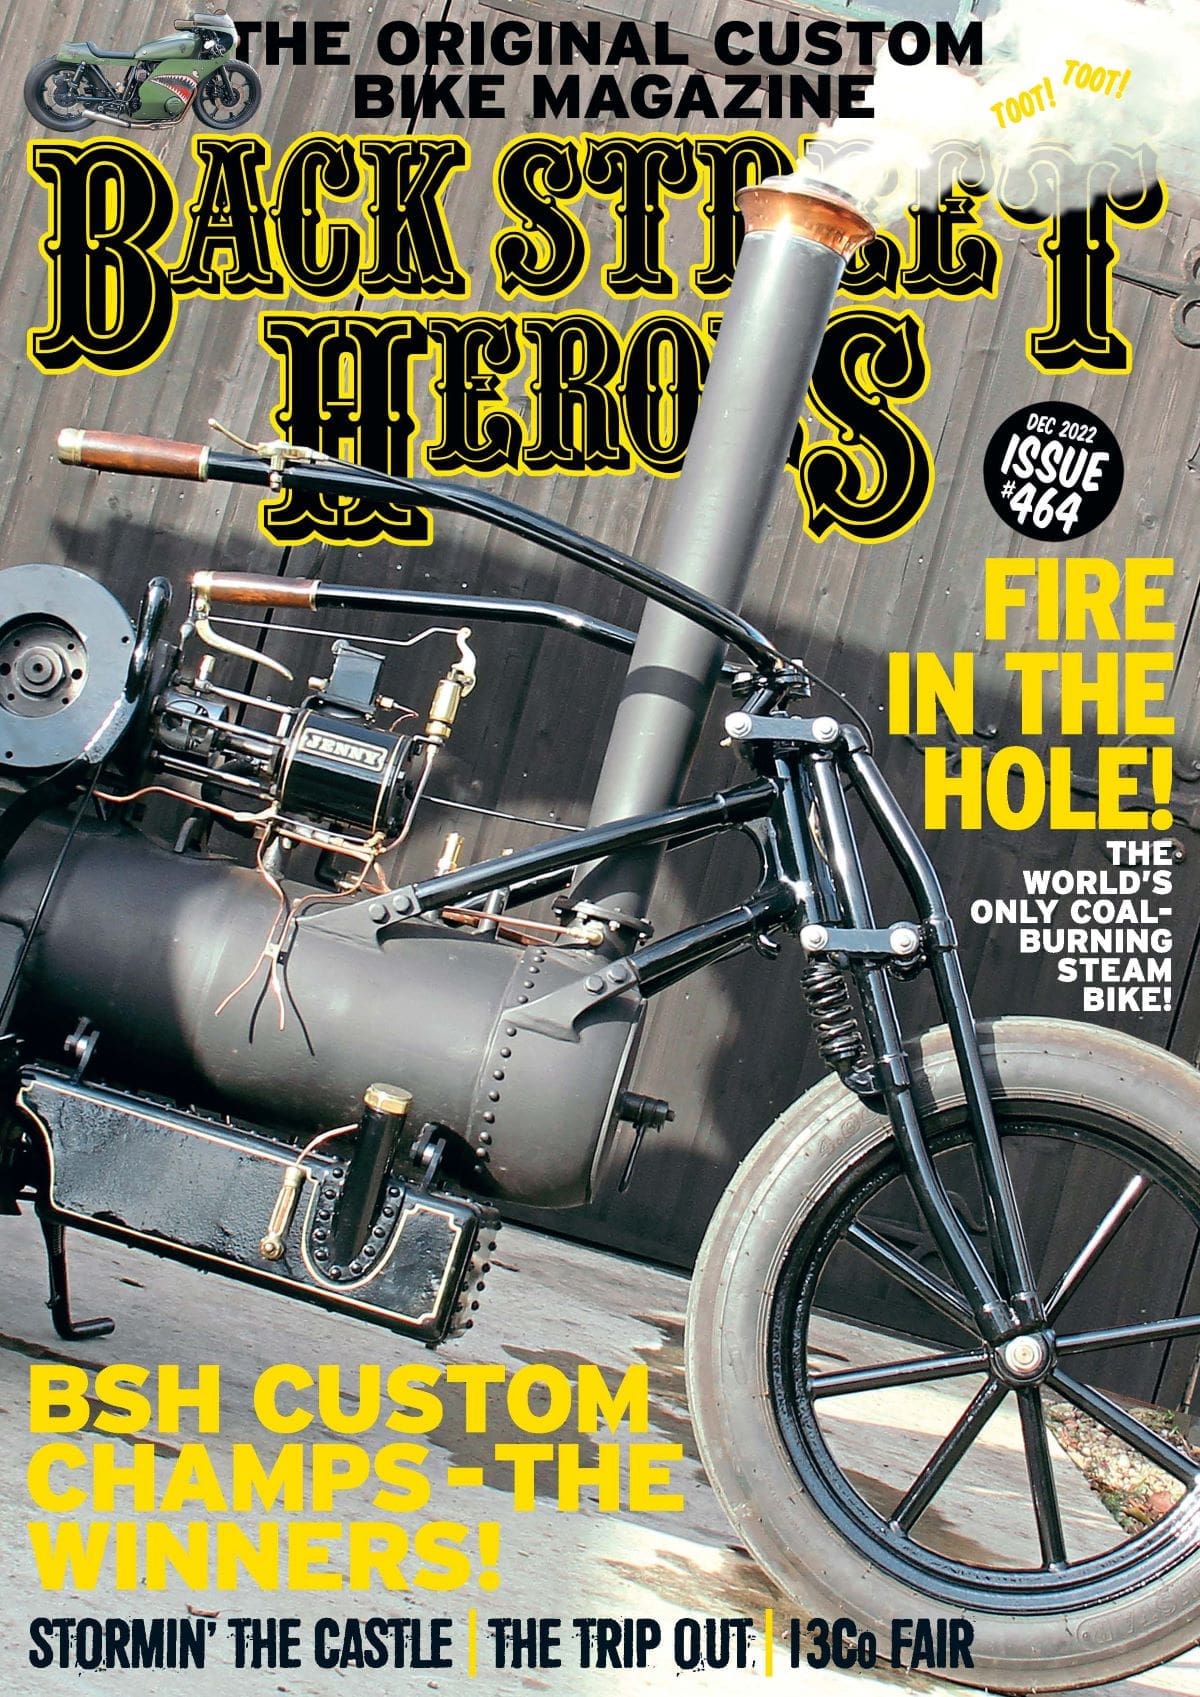 The December cover of Back Street Heroes.